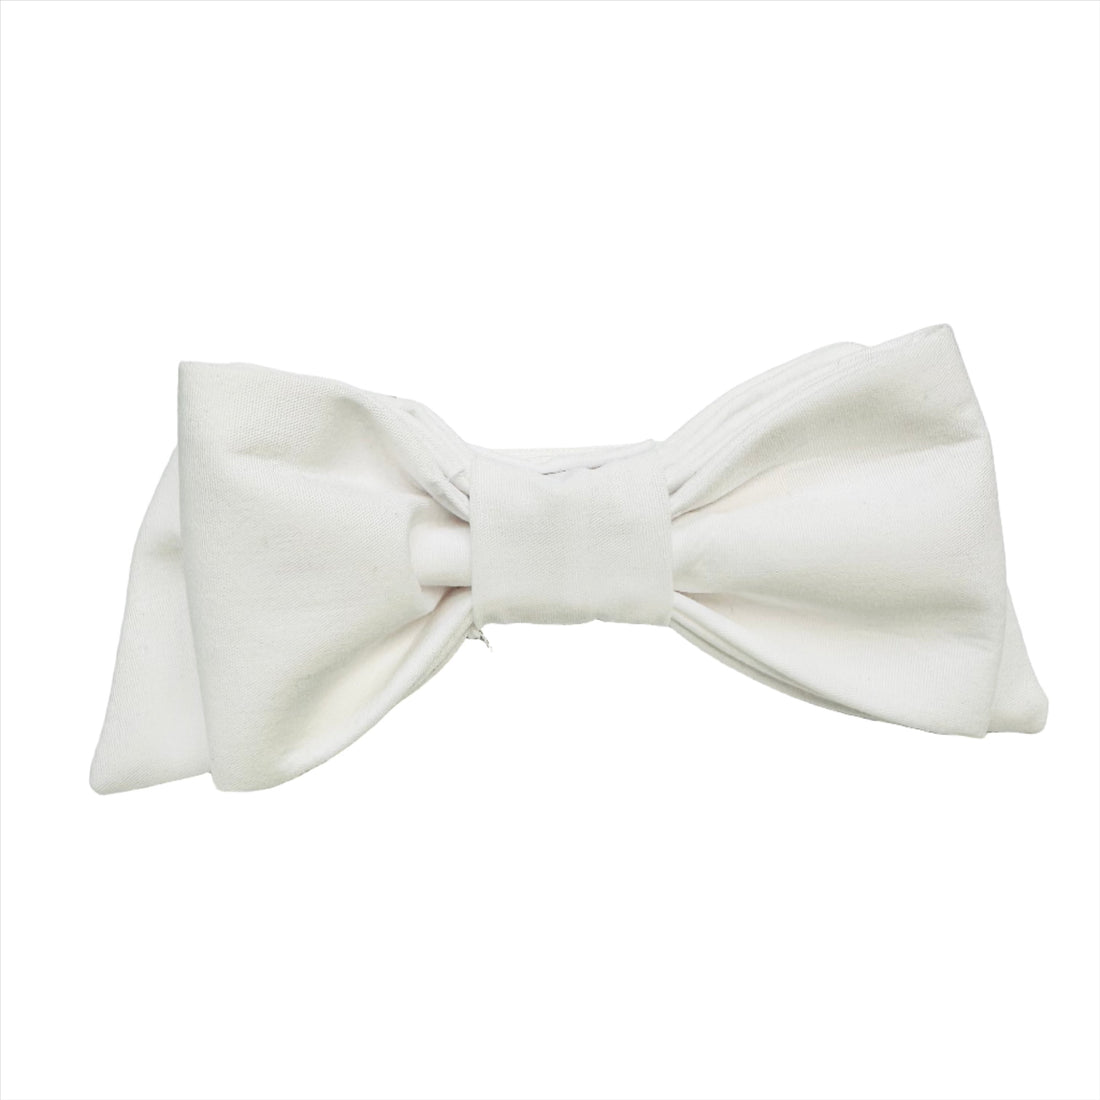 The Bow Next Door Betsy Baby Hairbow-White